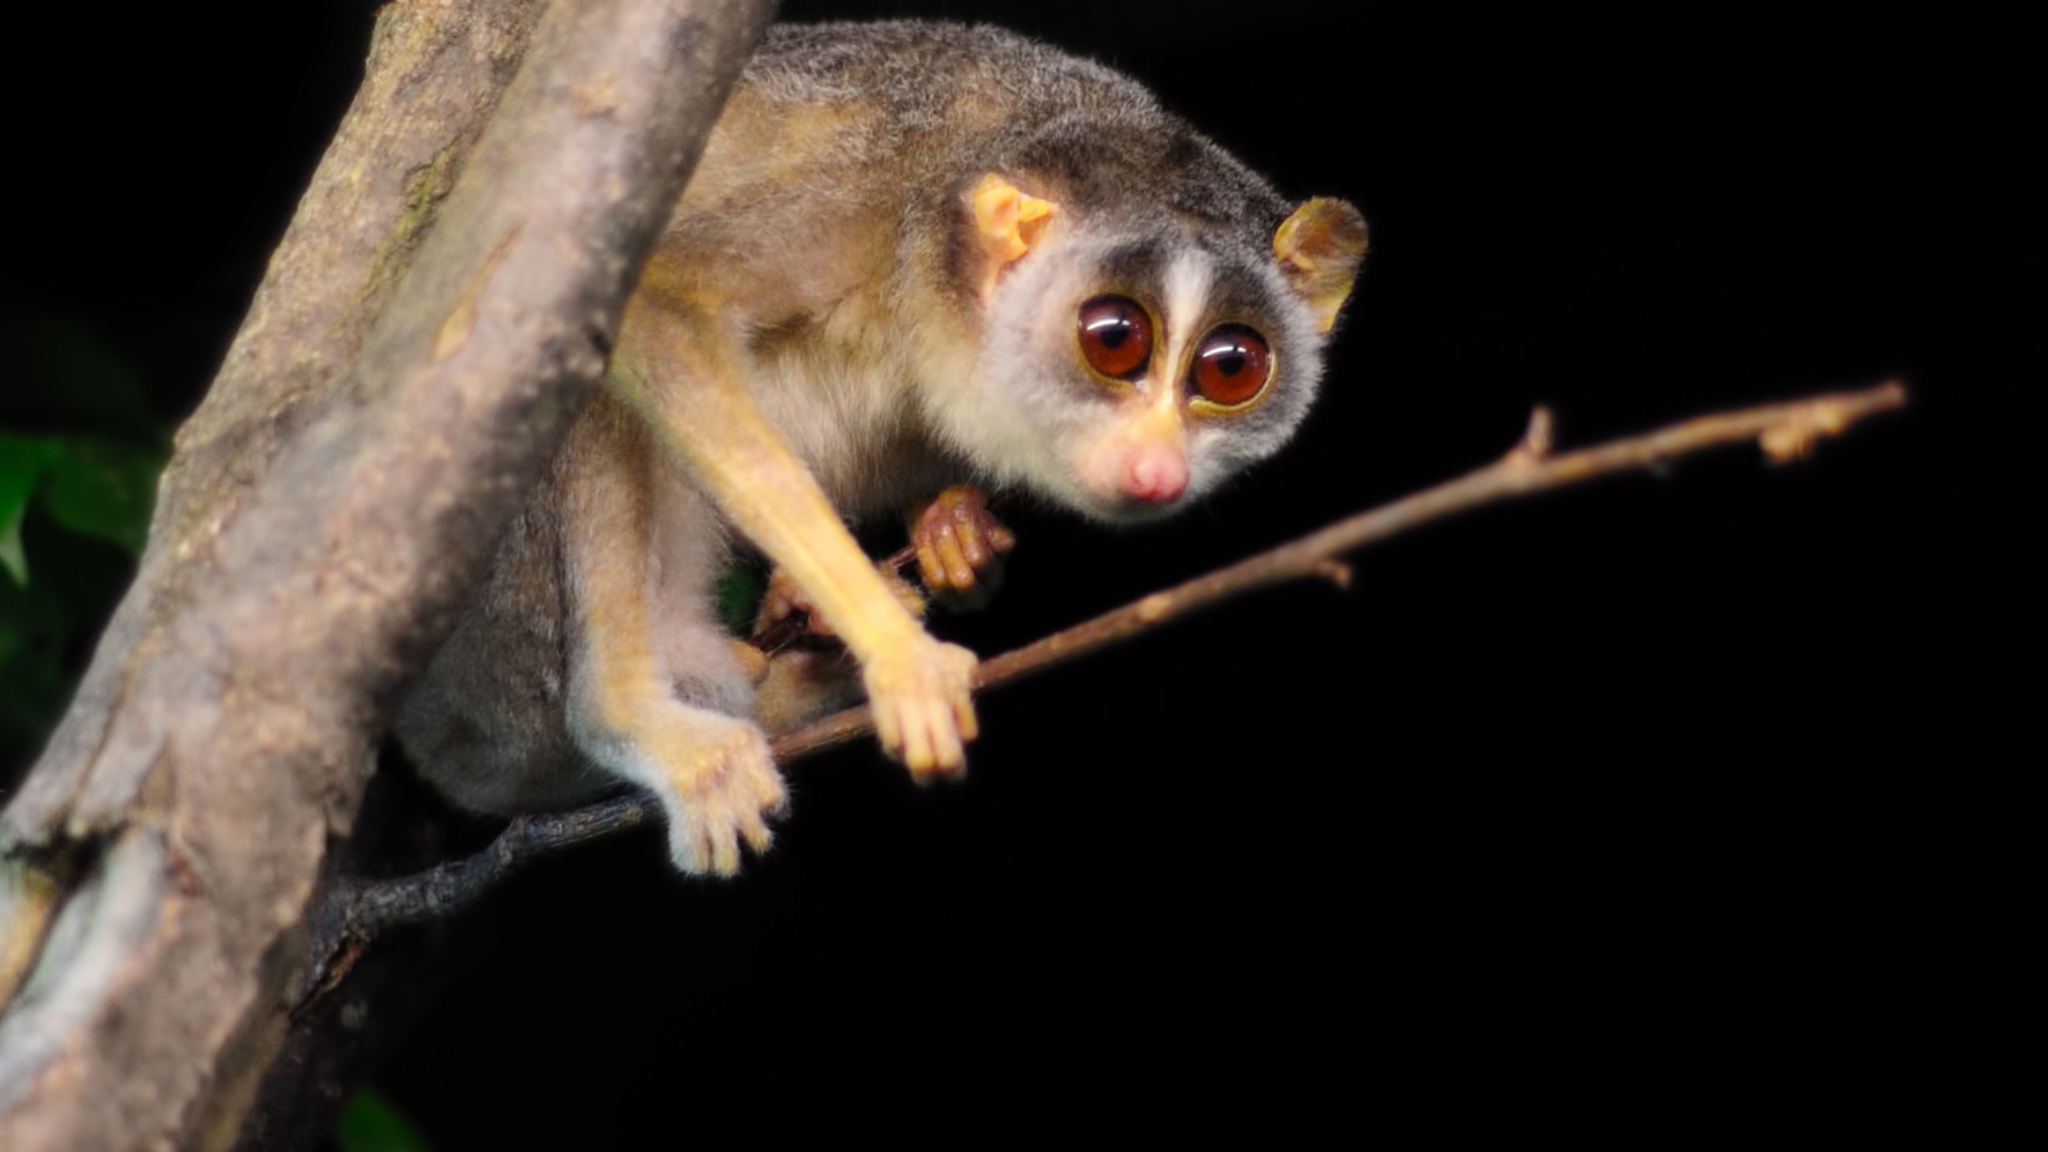 Loris The Animal Appeared In The Famous Movie Series Madagascar